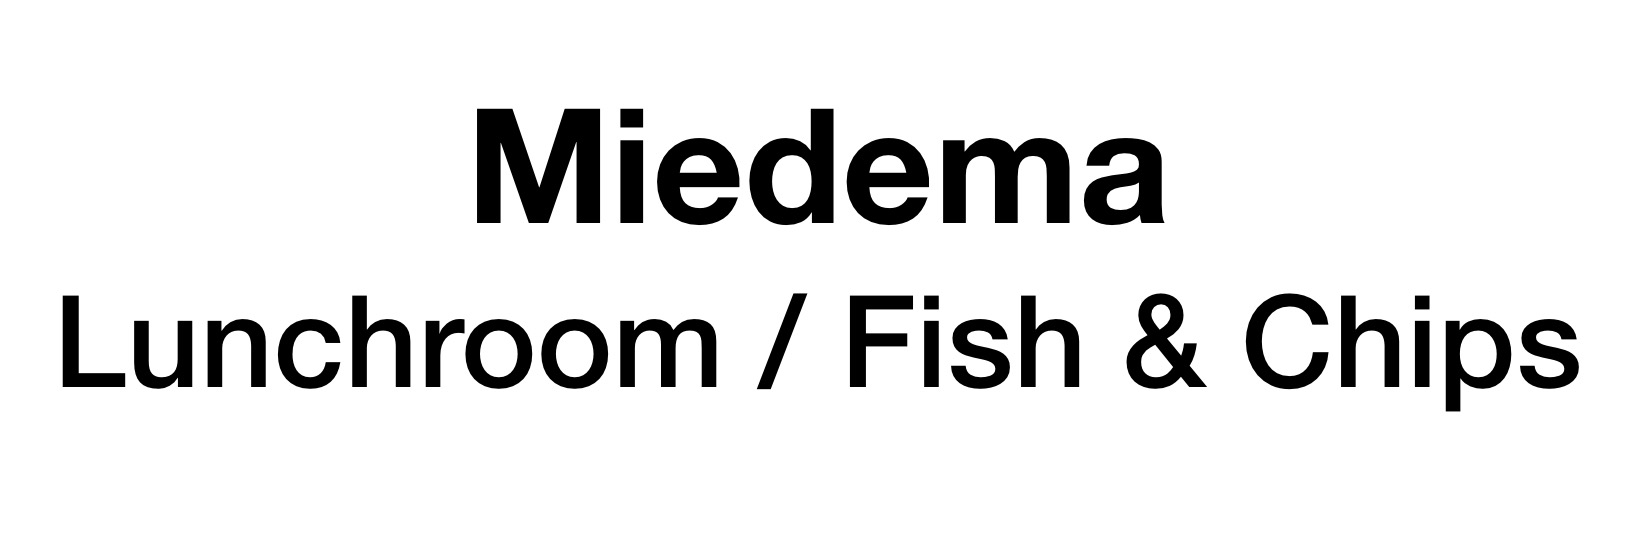 Miedema Fish & Chips/Lunchroom